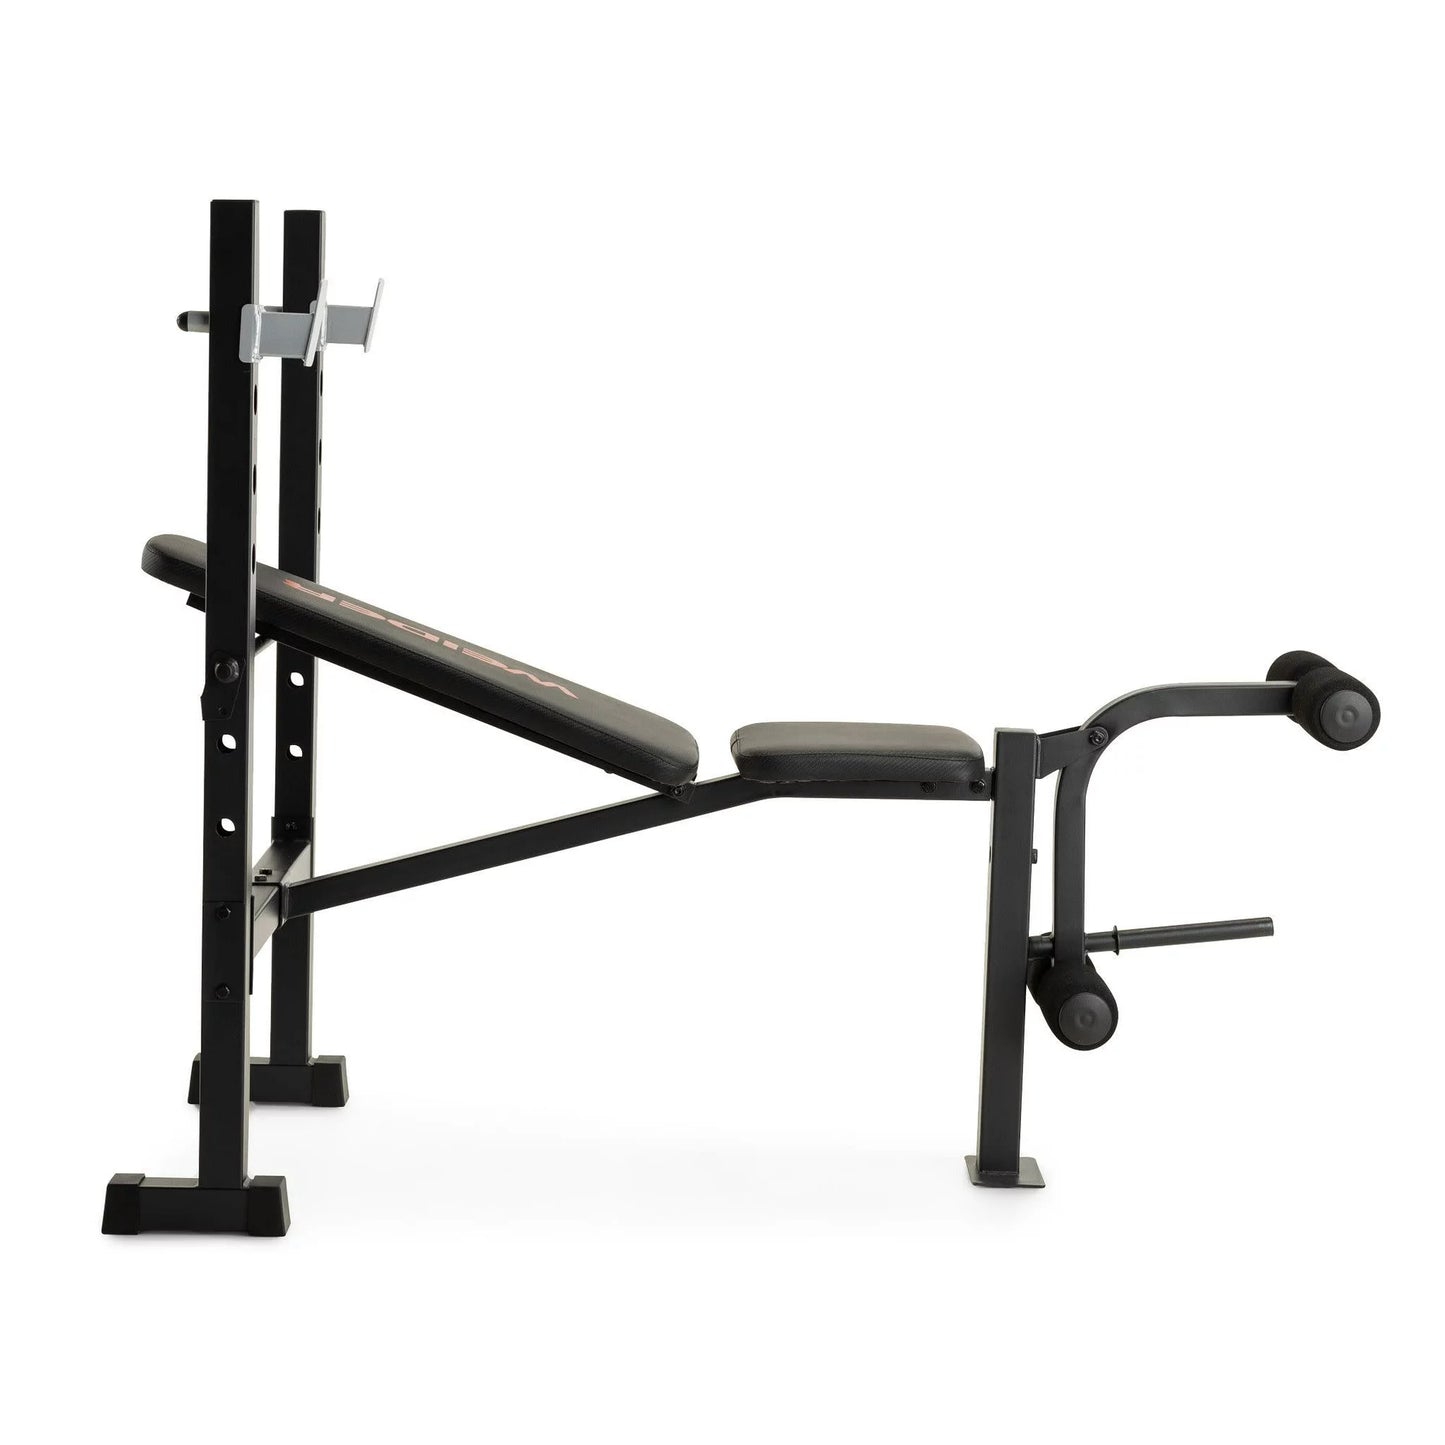 Weider Pro 225 L Adjustable Exercise Bench with Integrated Leg